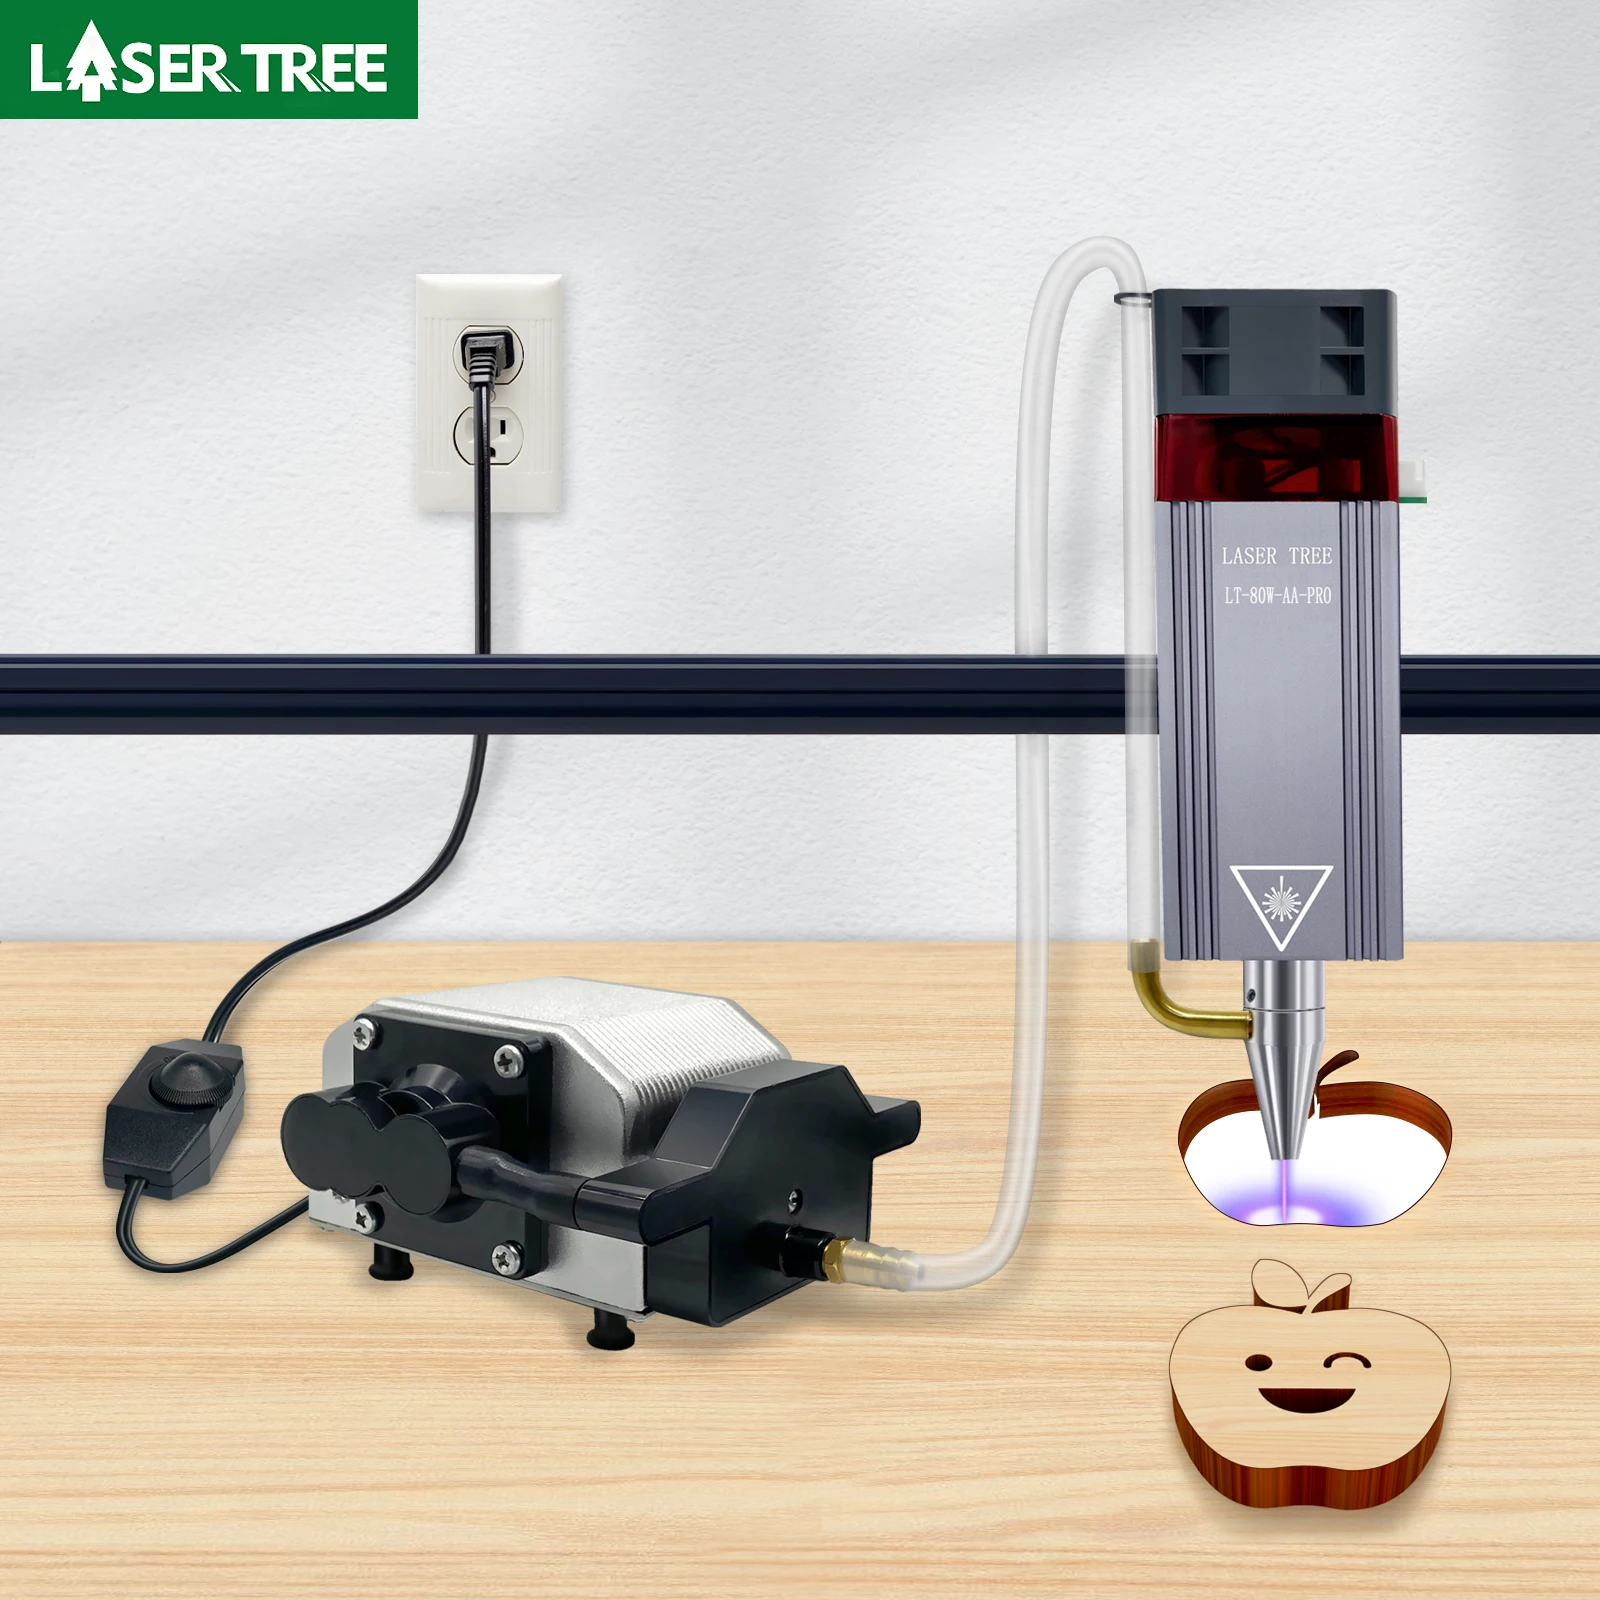 

LASER TREE Optical Power 5W 10W Laser Head with Air Assist 450nm Blue Light TTL Module for Laser Engraver Cutting Wood Tools